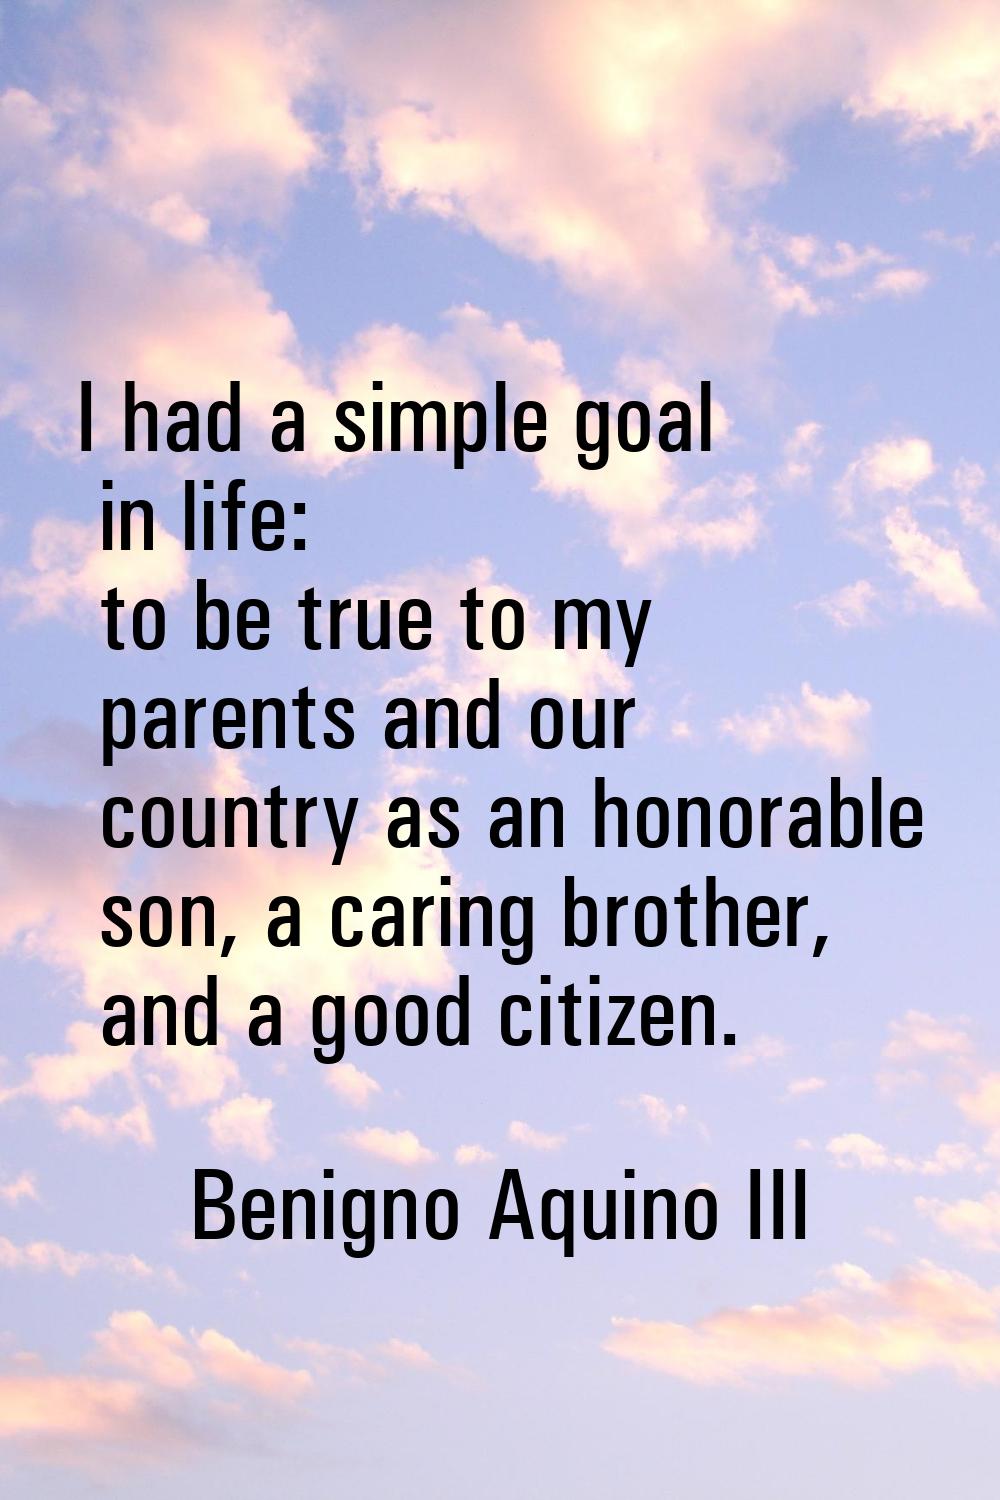 I had a simple goal in life: to be true to my parents and our country as an honorable son, a caring